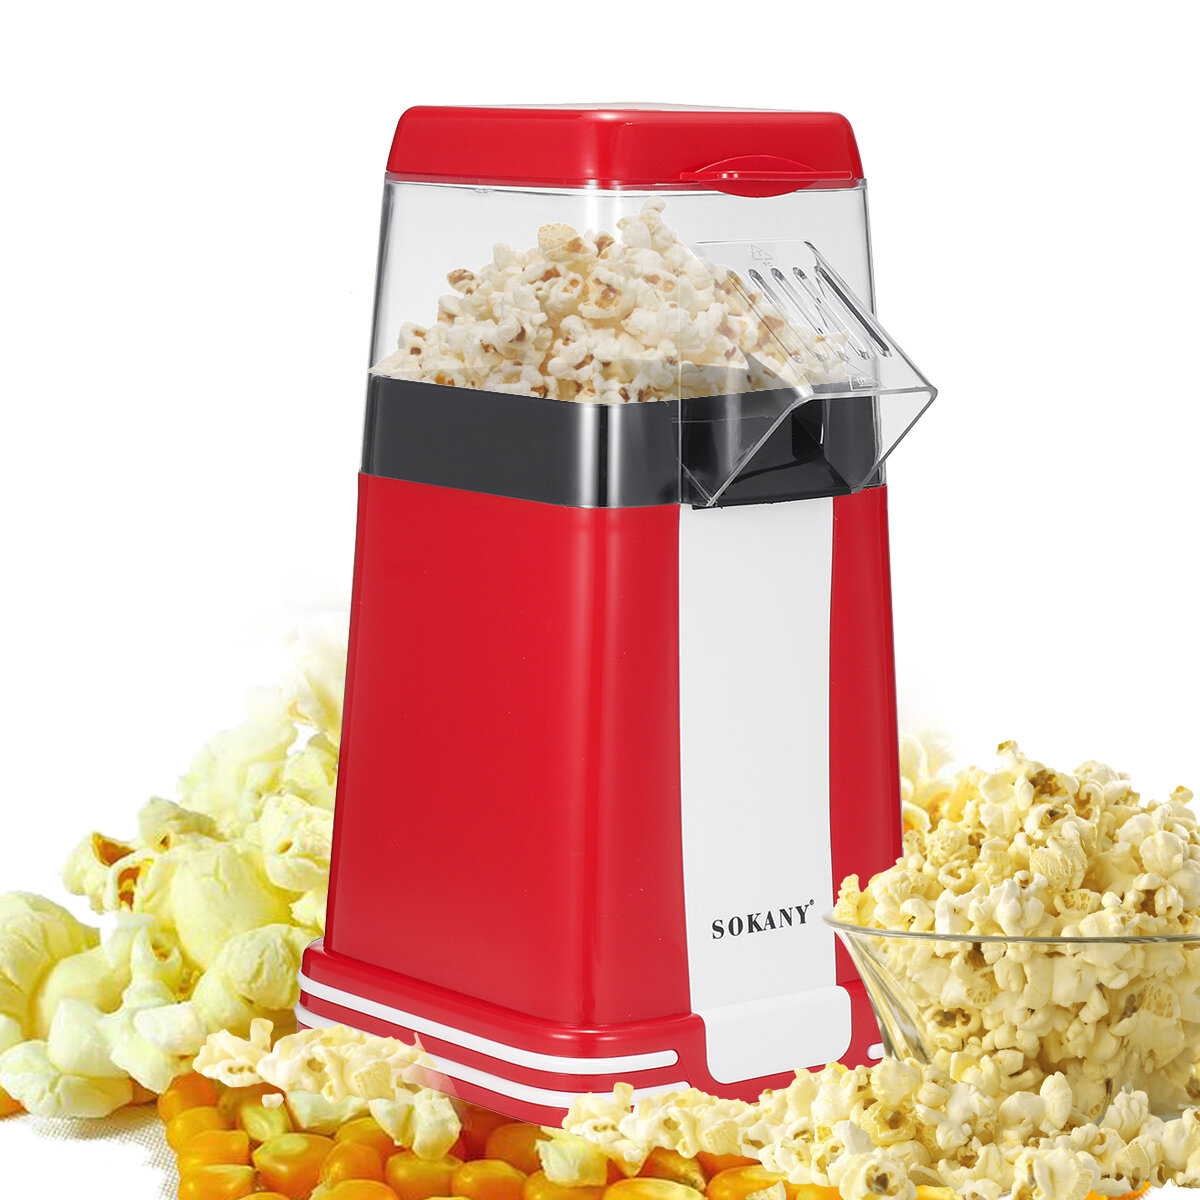 

SOKANY SK-289 Popcorn Maker 1200W Powerful Electric Popcorn Machine with Anti-slip Foot Pad Easy Operation, Less Oil